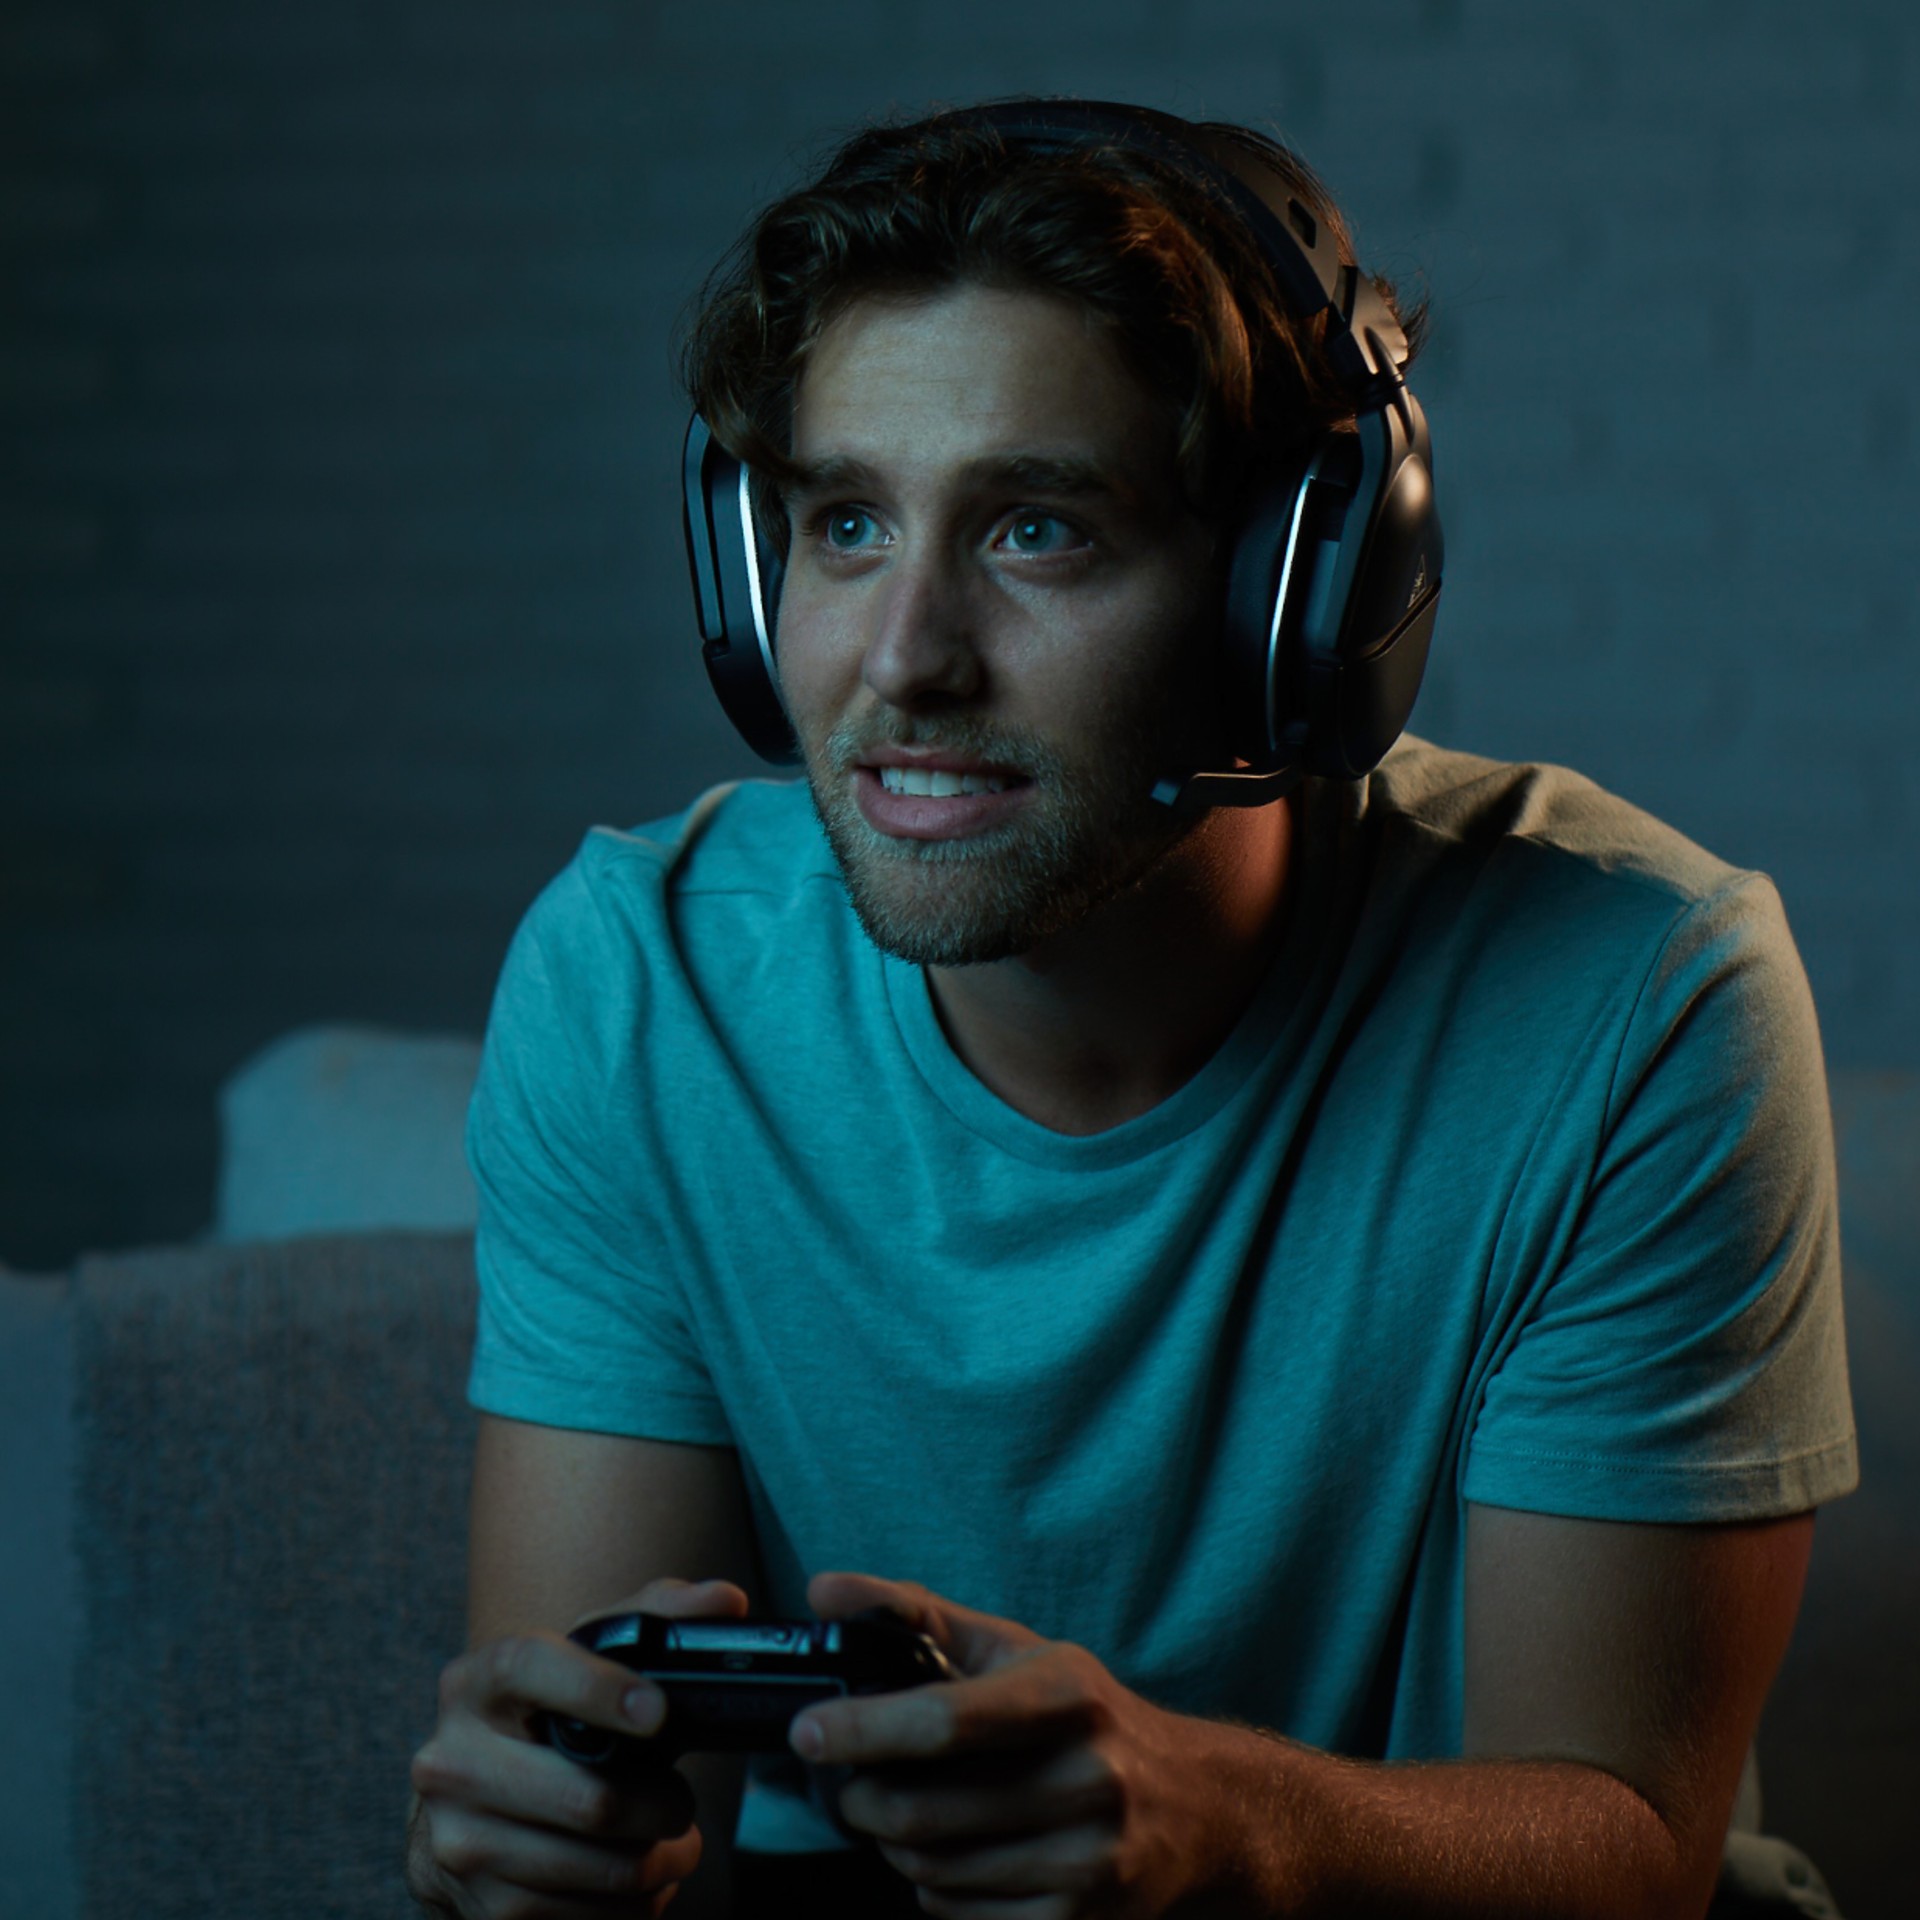 Turtle Beach’s new gaming headsets have a revived design and USB-C charging